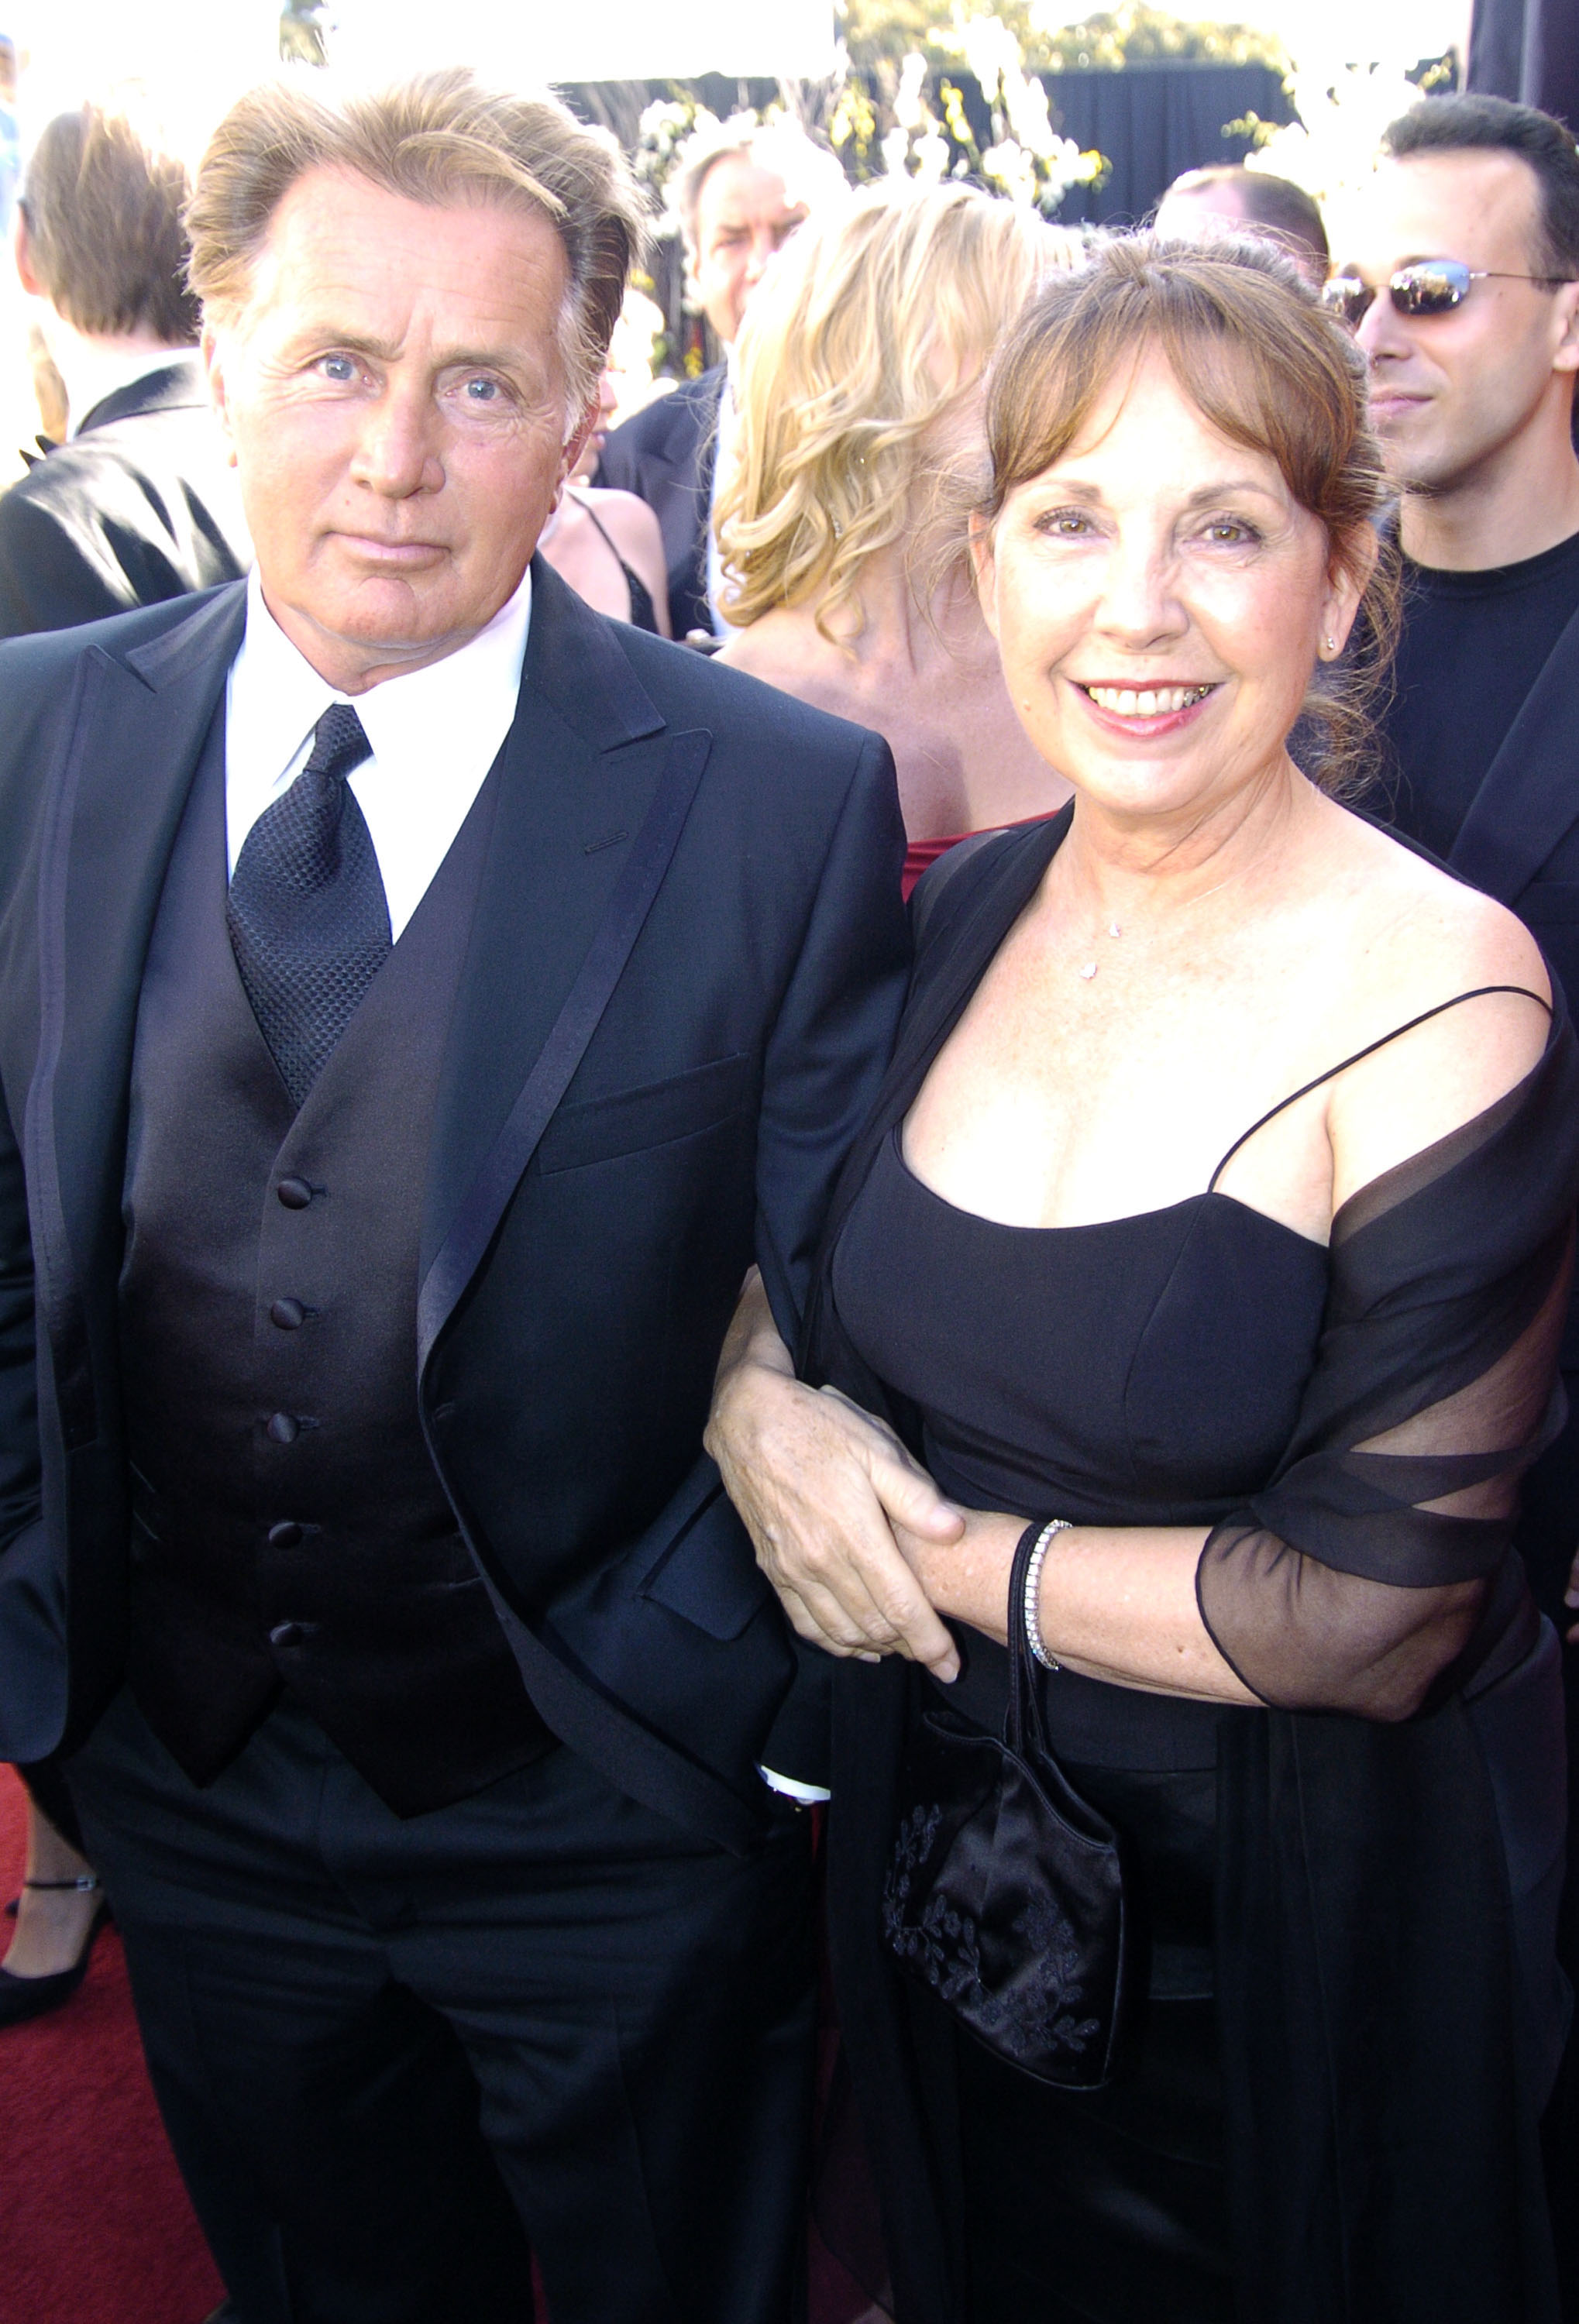 Martin Sheen and Janet Sheen during the 56th Annual Primetime Emmy Awards at The Shrine Auditorium on September 19, 2004 in Los Angeles, California | Source: Getty Images